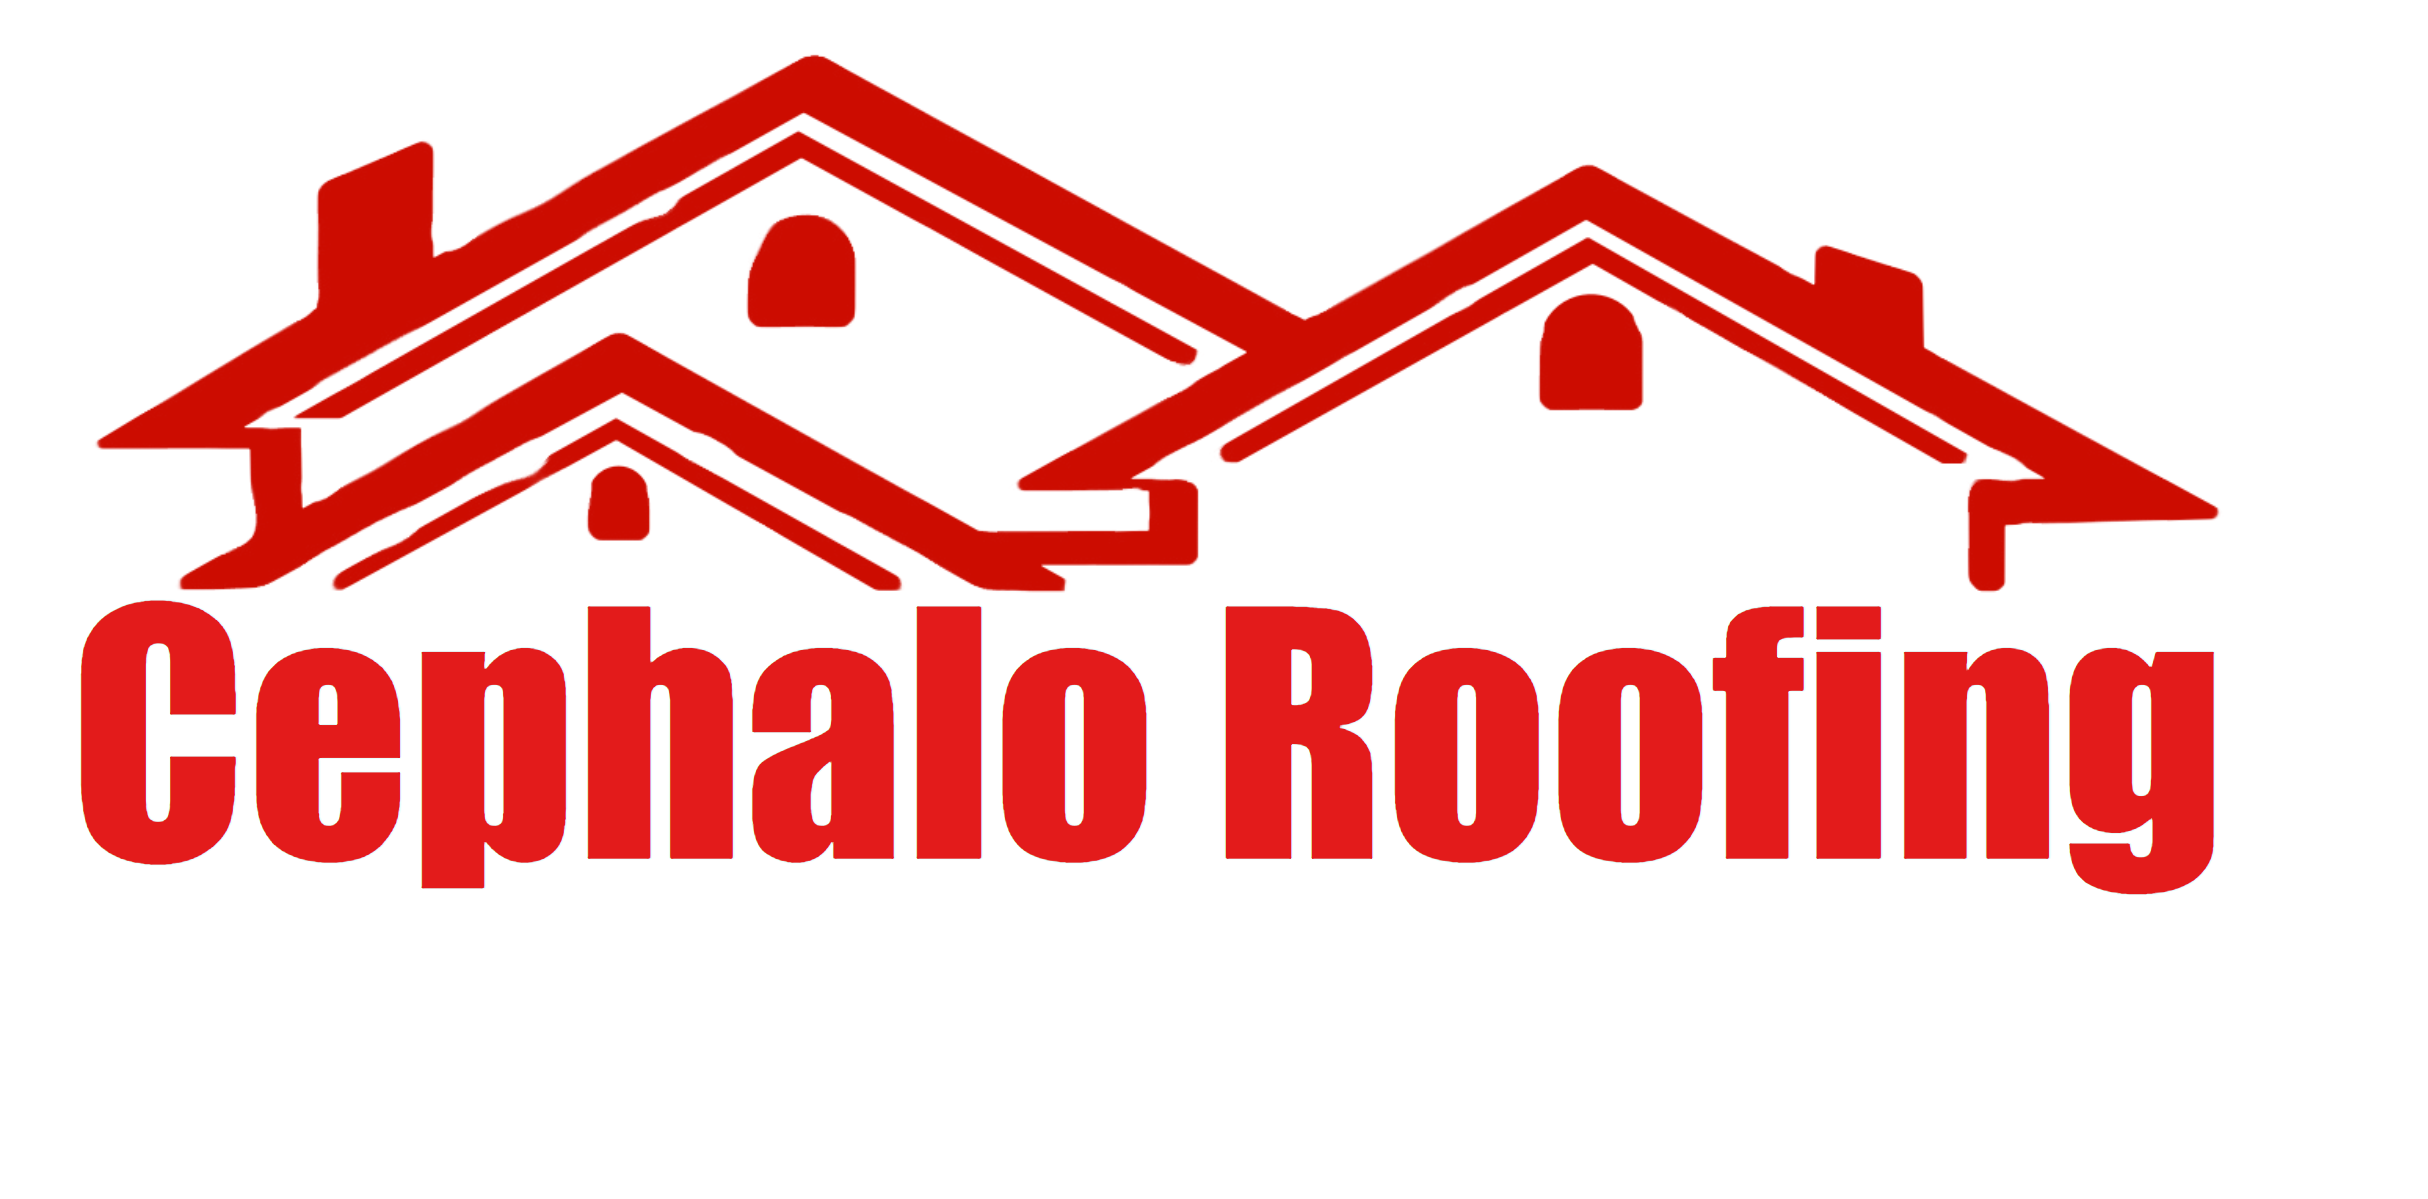 Roof Repair Company Cephalo Roofing Arch